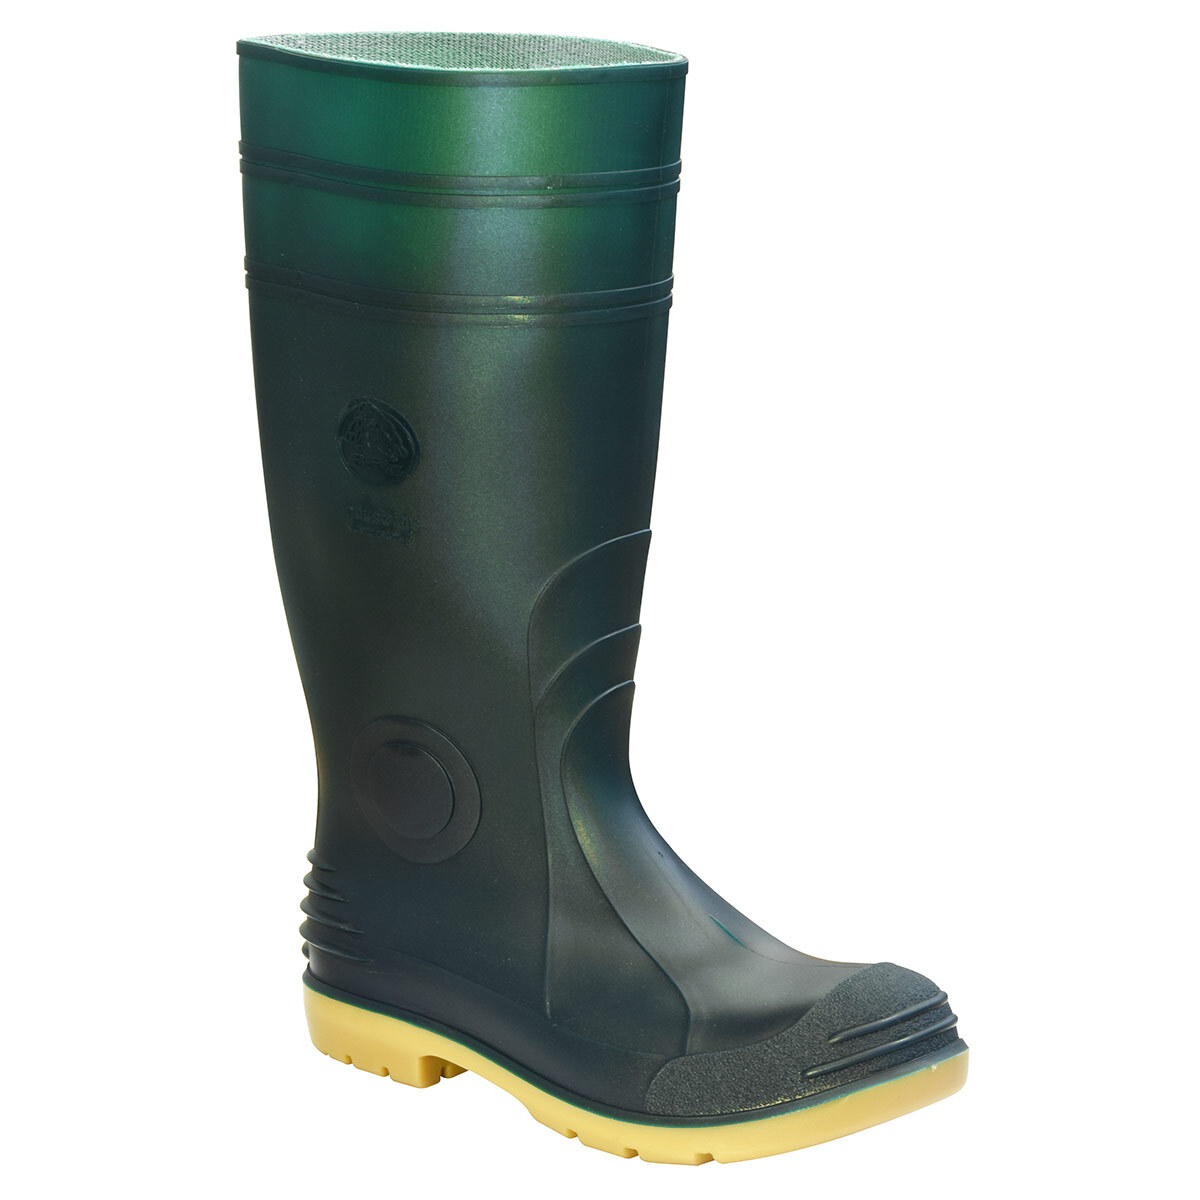 Jobmaster 2 Gumboots, Non-Safety Toe - Green